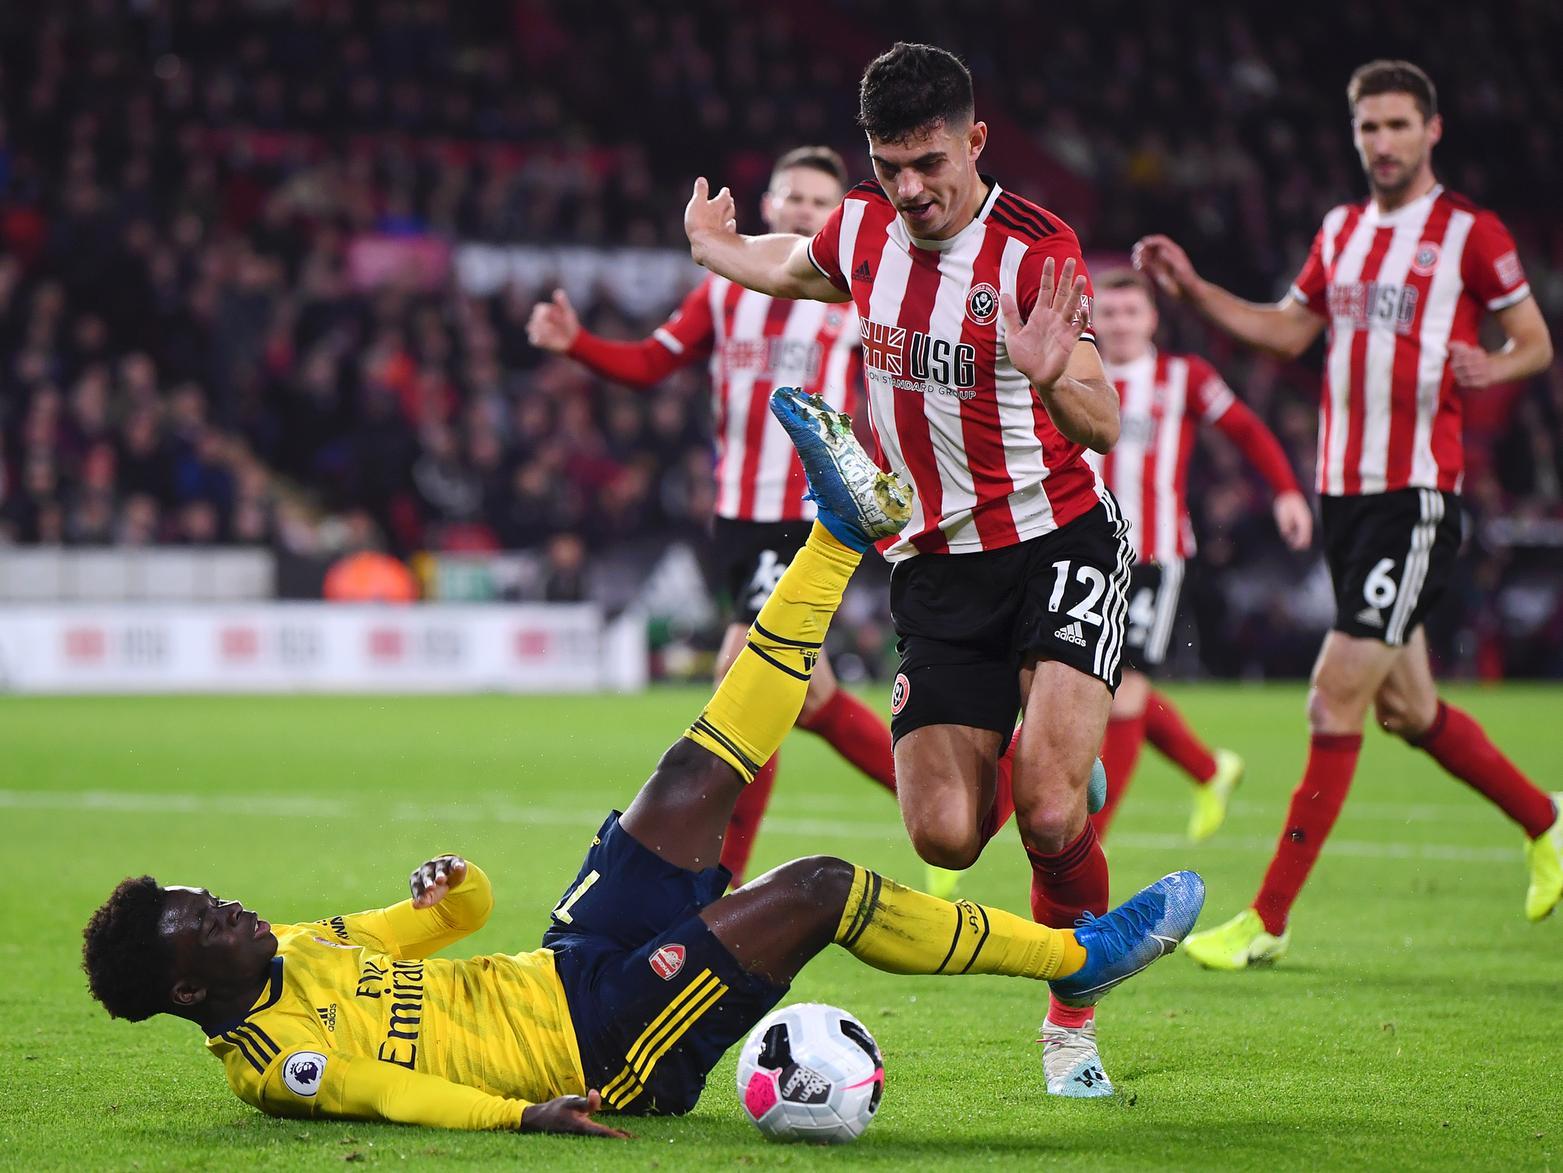 John Egan was injured on international duty in midweek, and Chris Wilder will make a late decision on whether to risk him against Manchester United. The Red Devils have won just once on the road in the league this season.